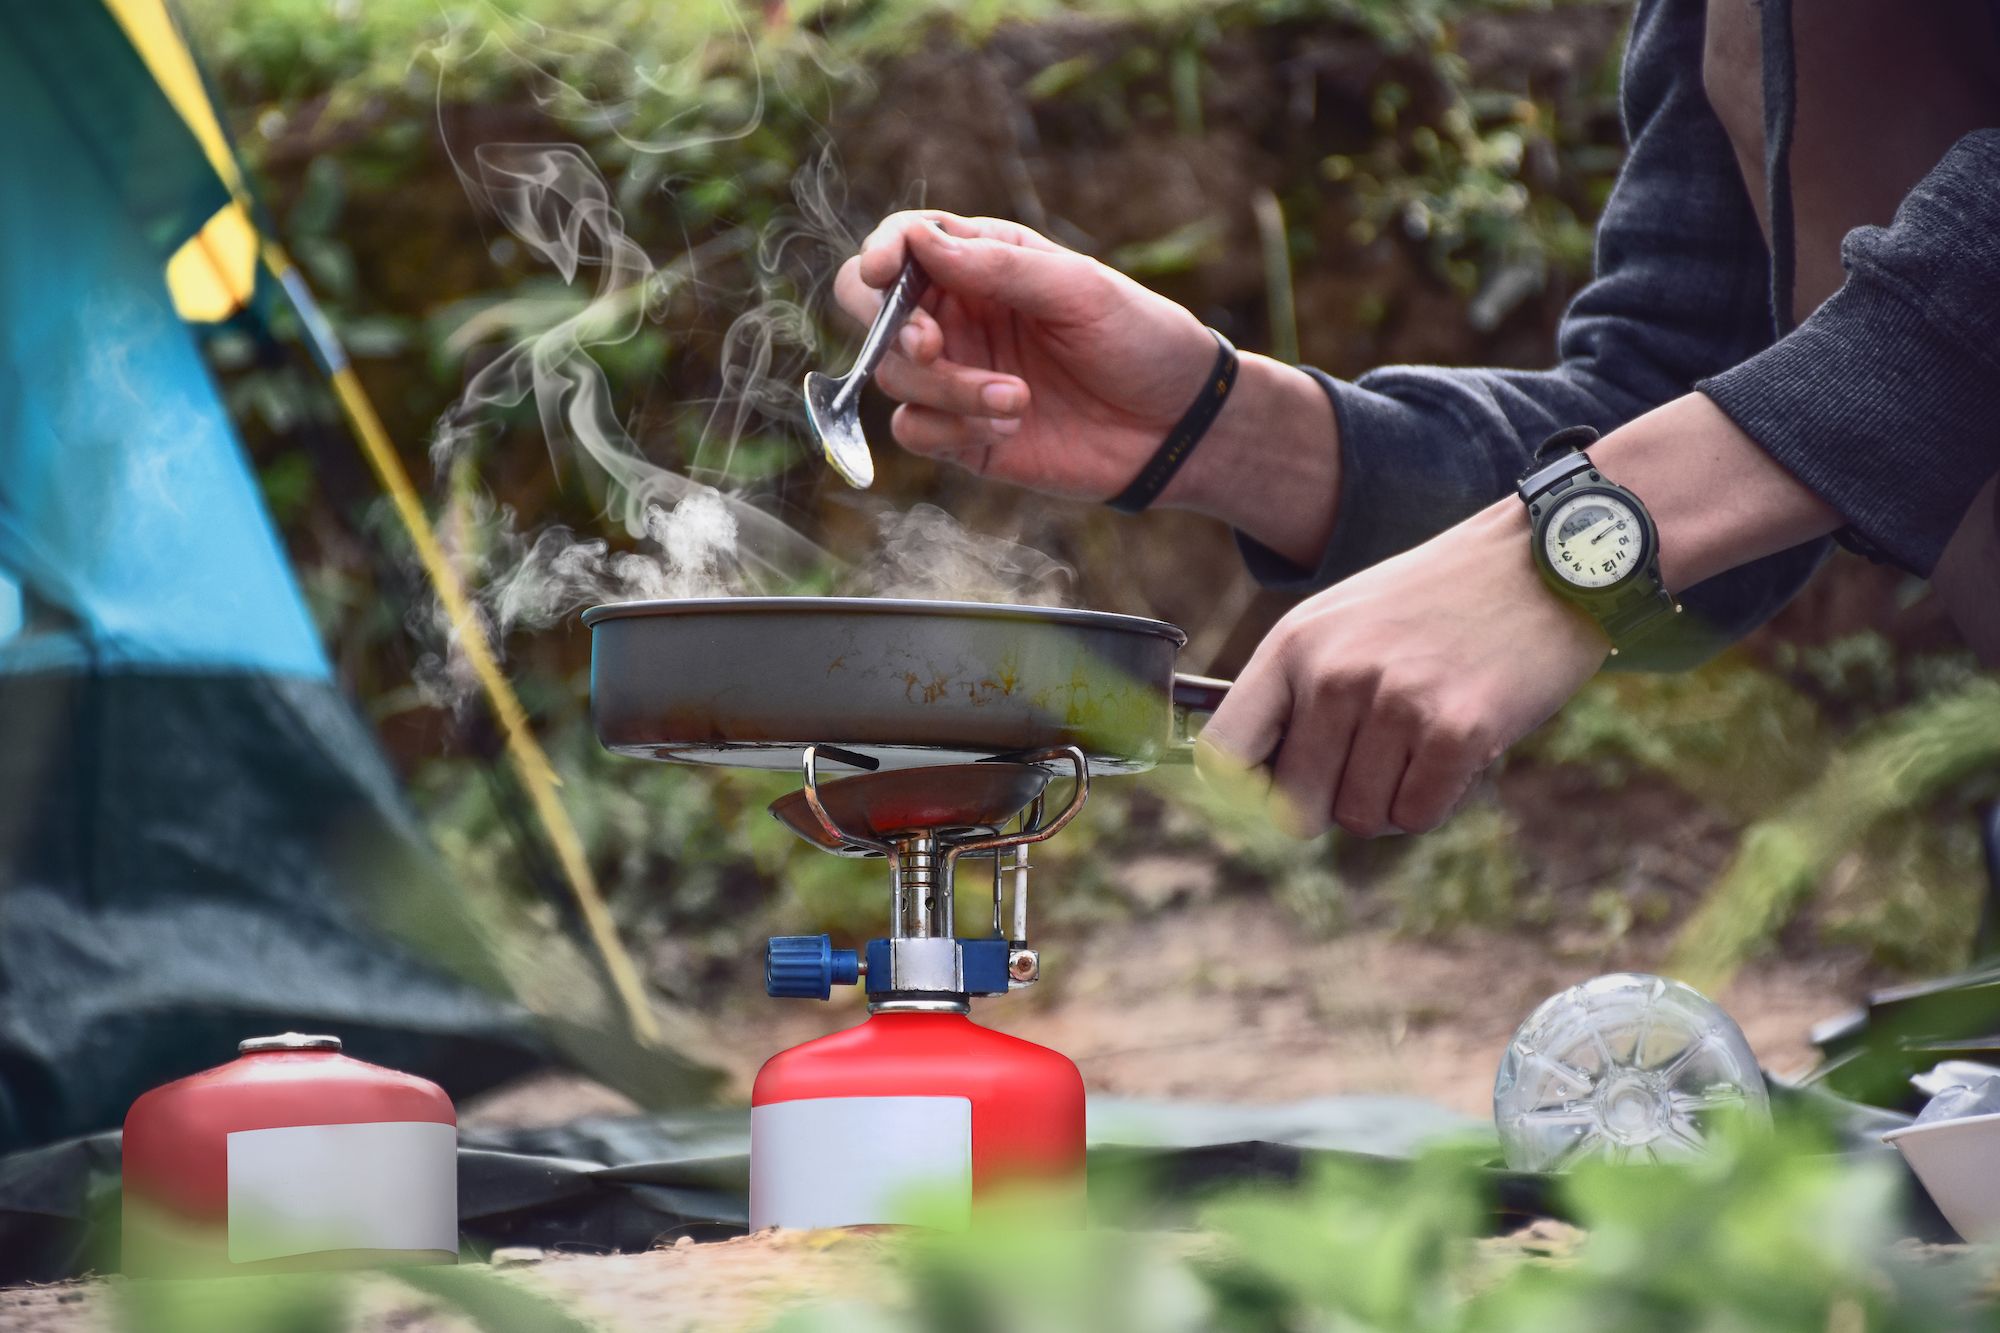 camper making breakfast hash in campsite on portable stove